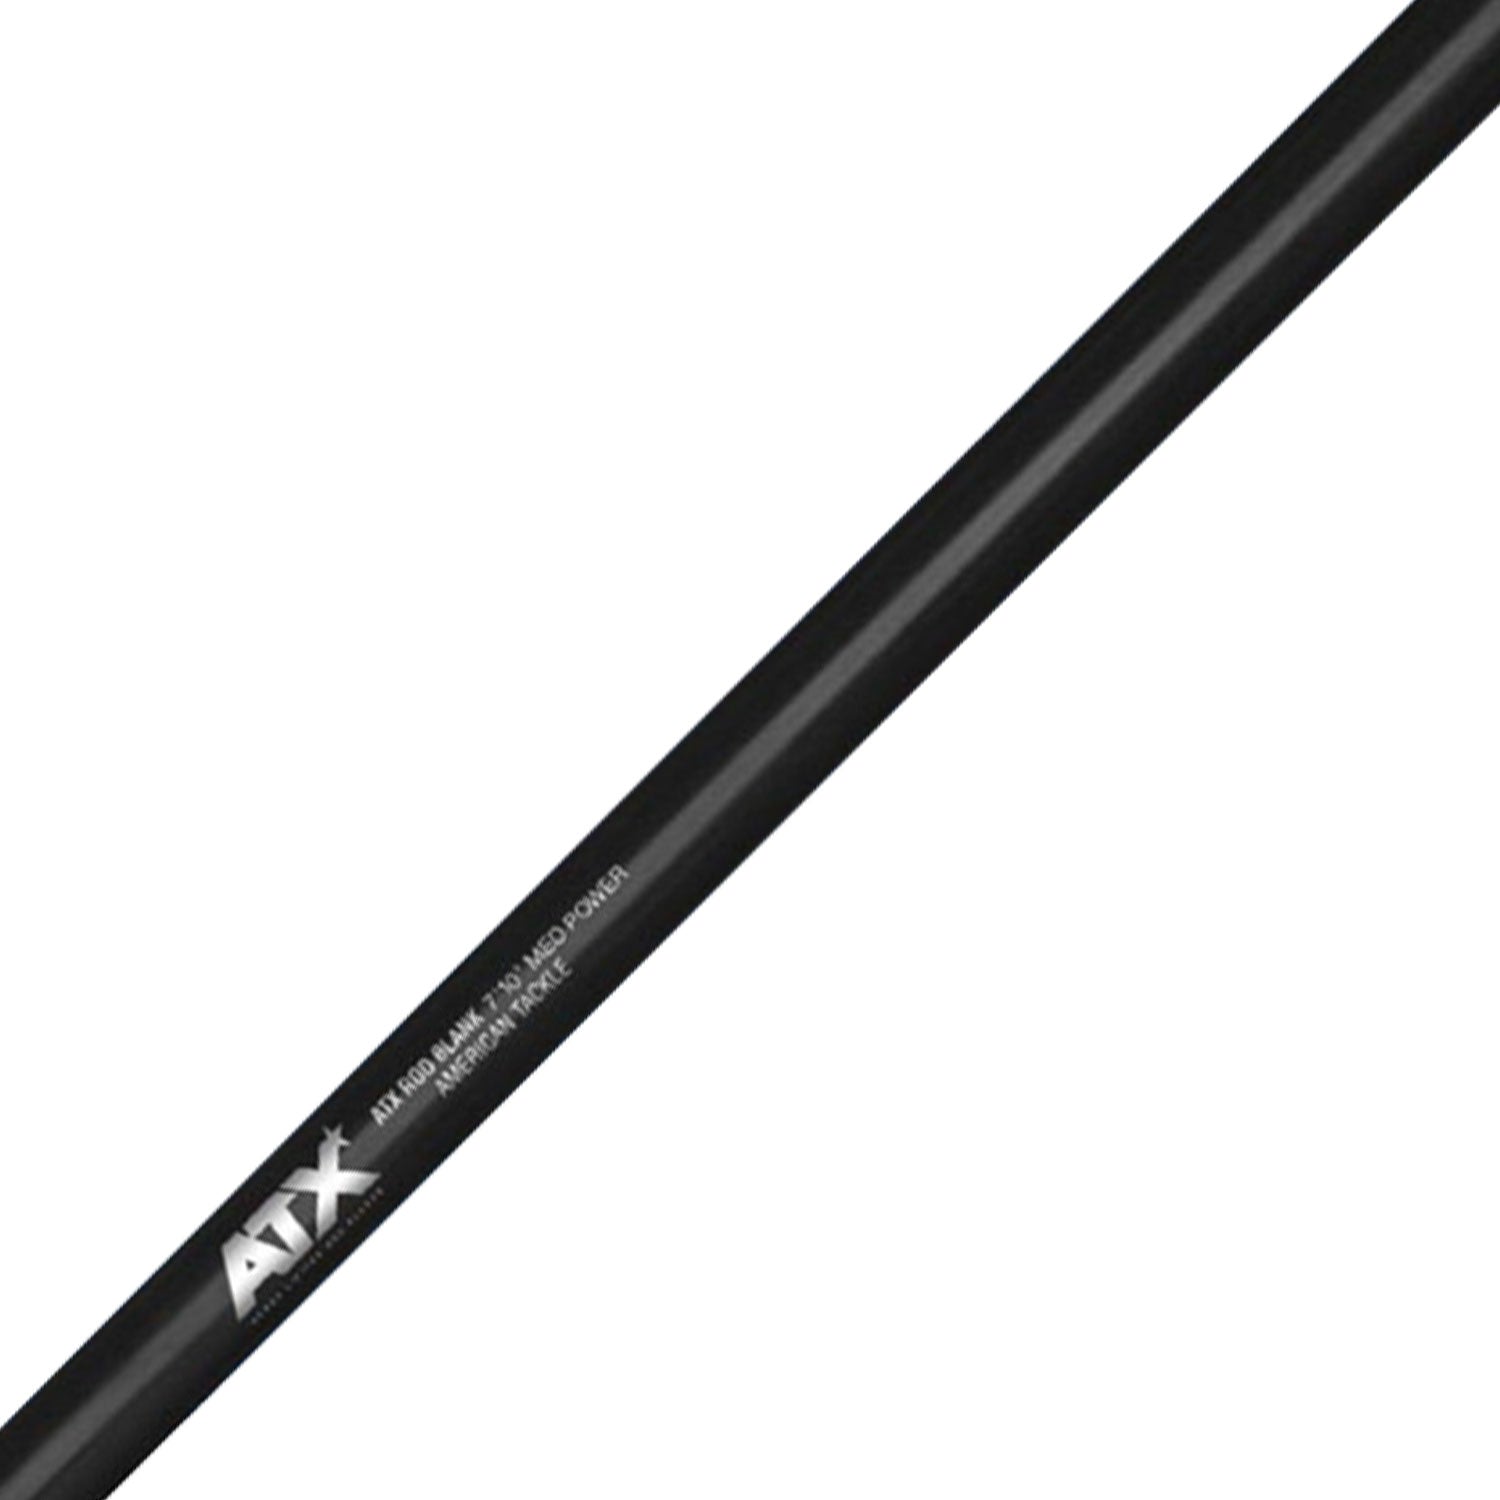 American Tackle AXST56XH Stand-Up Tuna Rod Blank